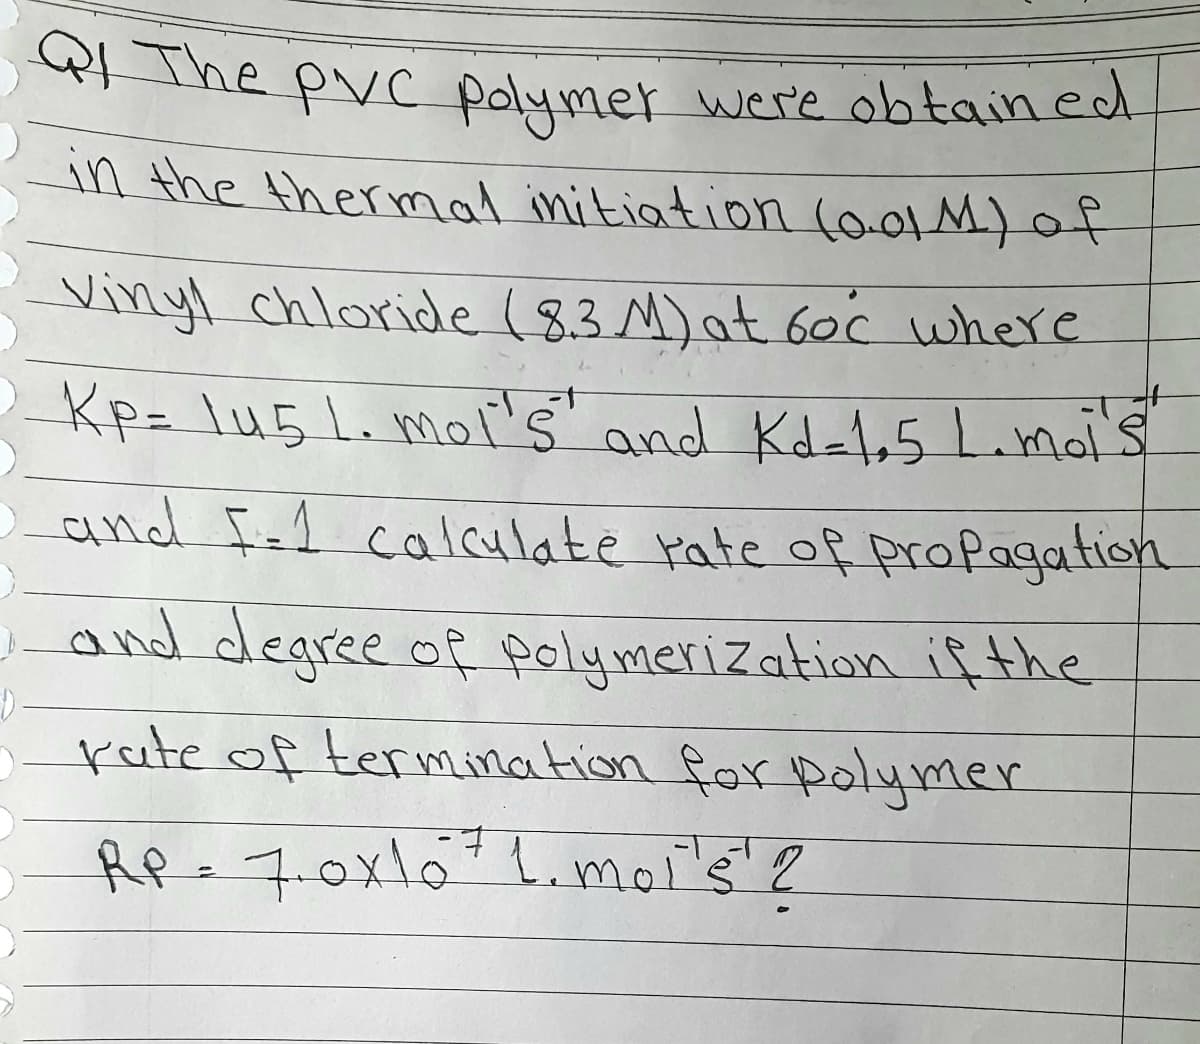 Qf The Pvc polymer were obtained
in the thermal initiation (0.01 M) of
Vinyl chloride (8.3 M) at 60°c where
Kp= 145 1. mol's" and Kd-1.5 L.moi's
and I=1 calculate rate of propagation
and degree of polymerization if the
rate of termination for polymer
RP = 7.0x16 ²1. moi's' ?